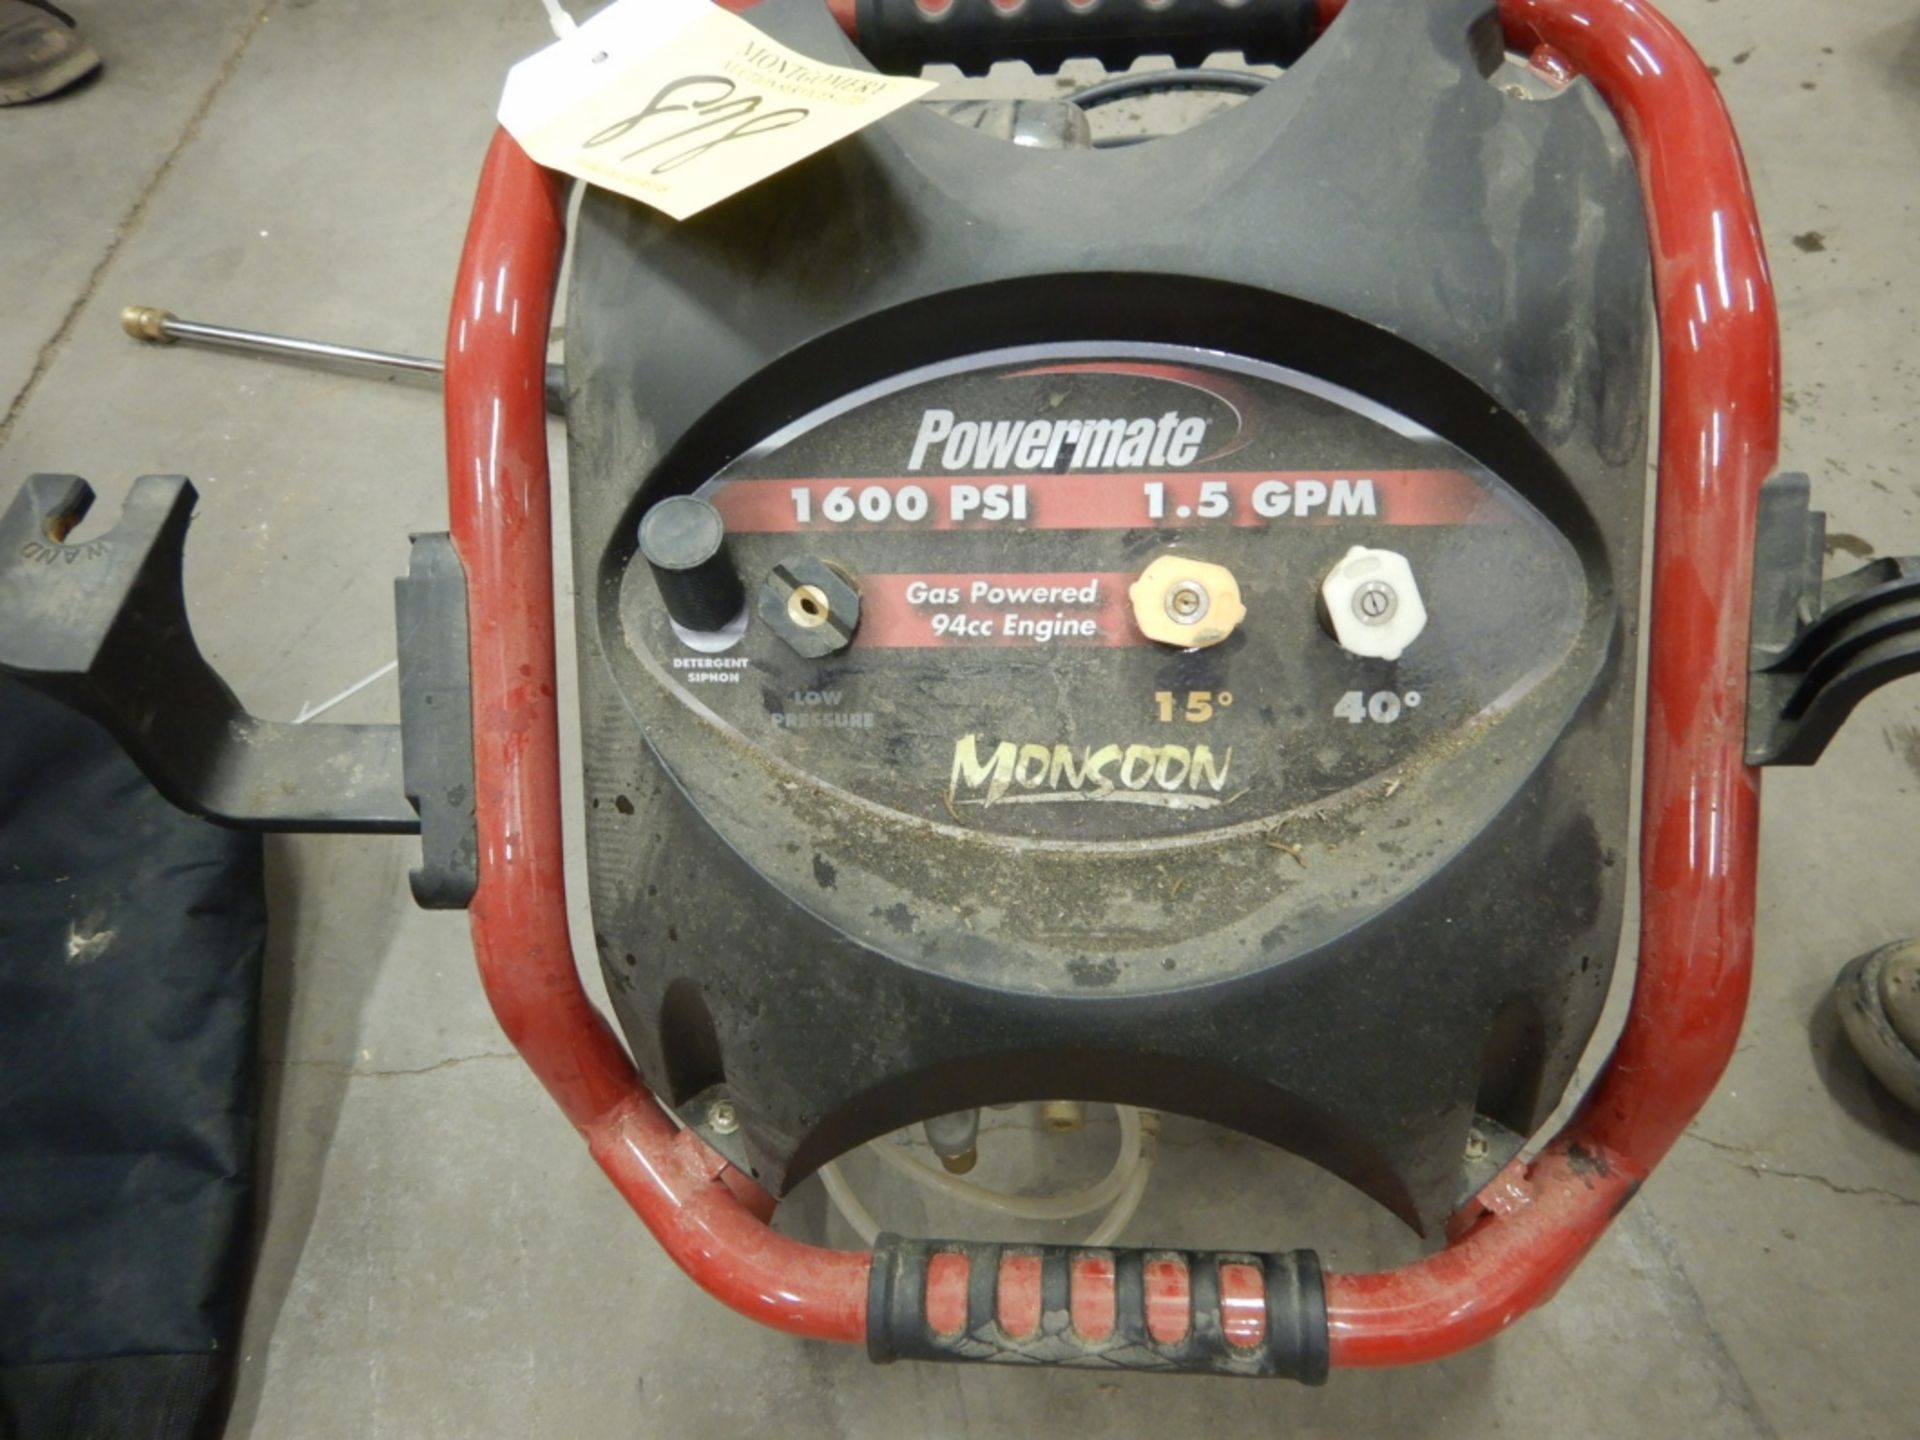 POWER MATE 1600 PSI X 1.5 GPM PRESSURE WASHER, MODEL MONSOON - Image 5 of 5